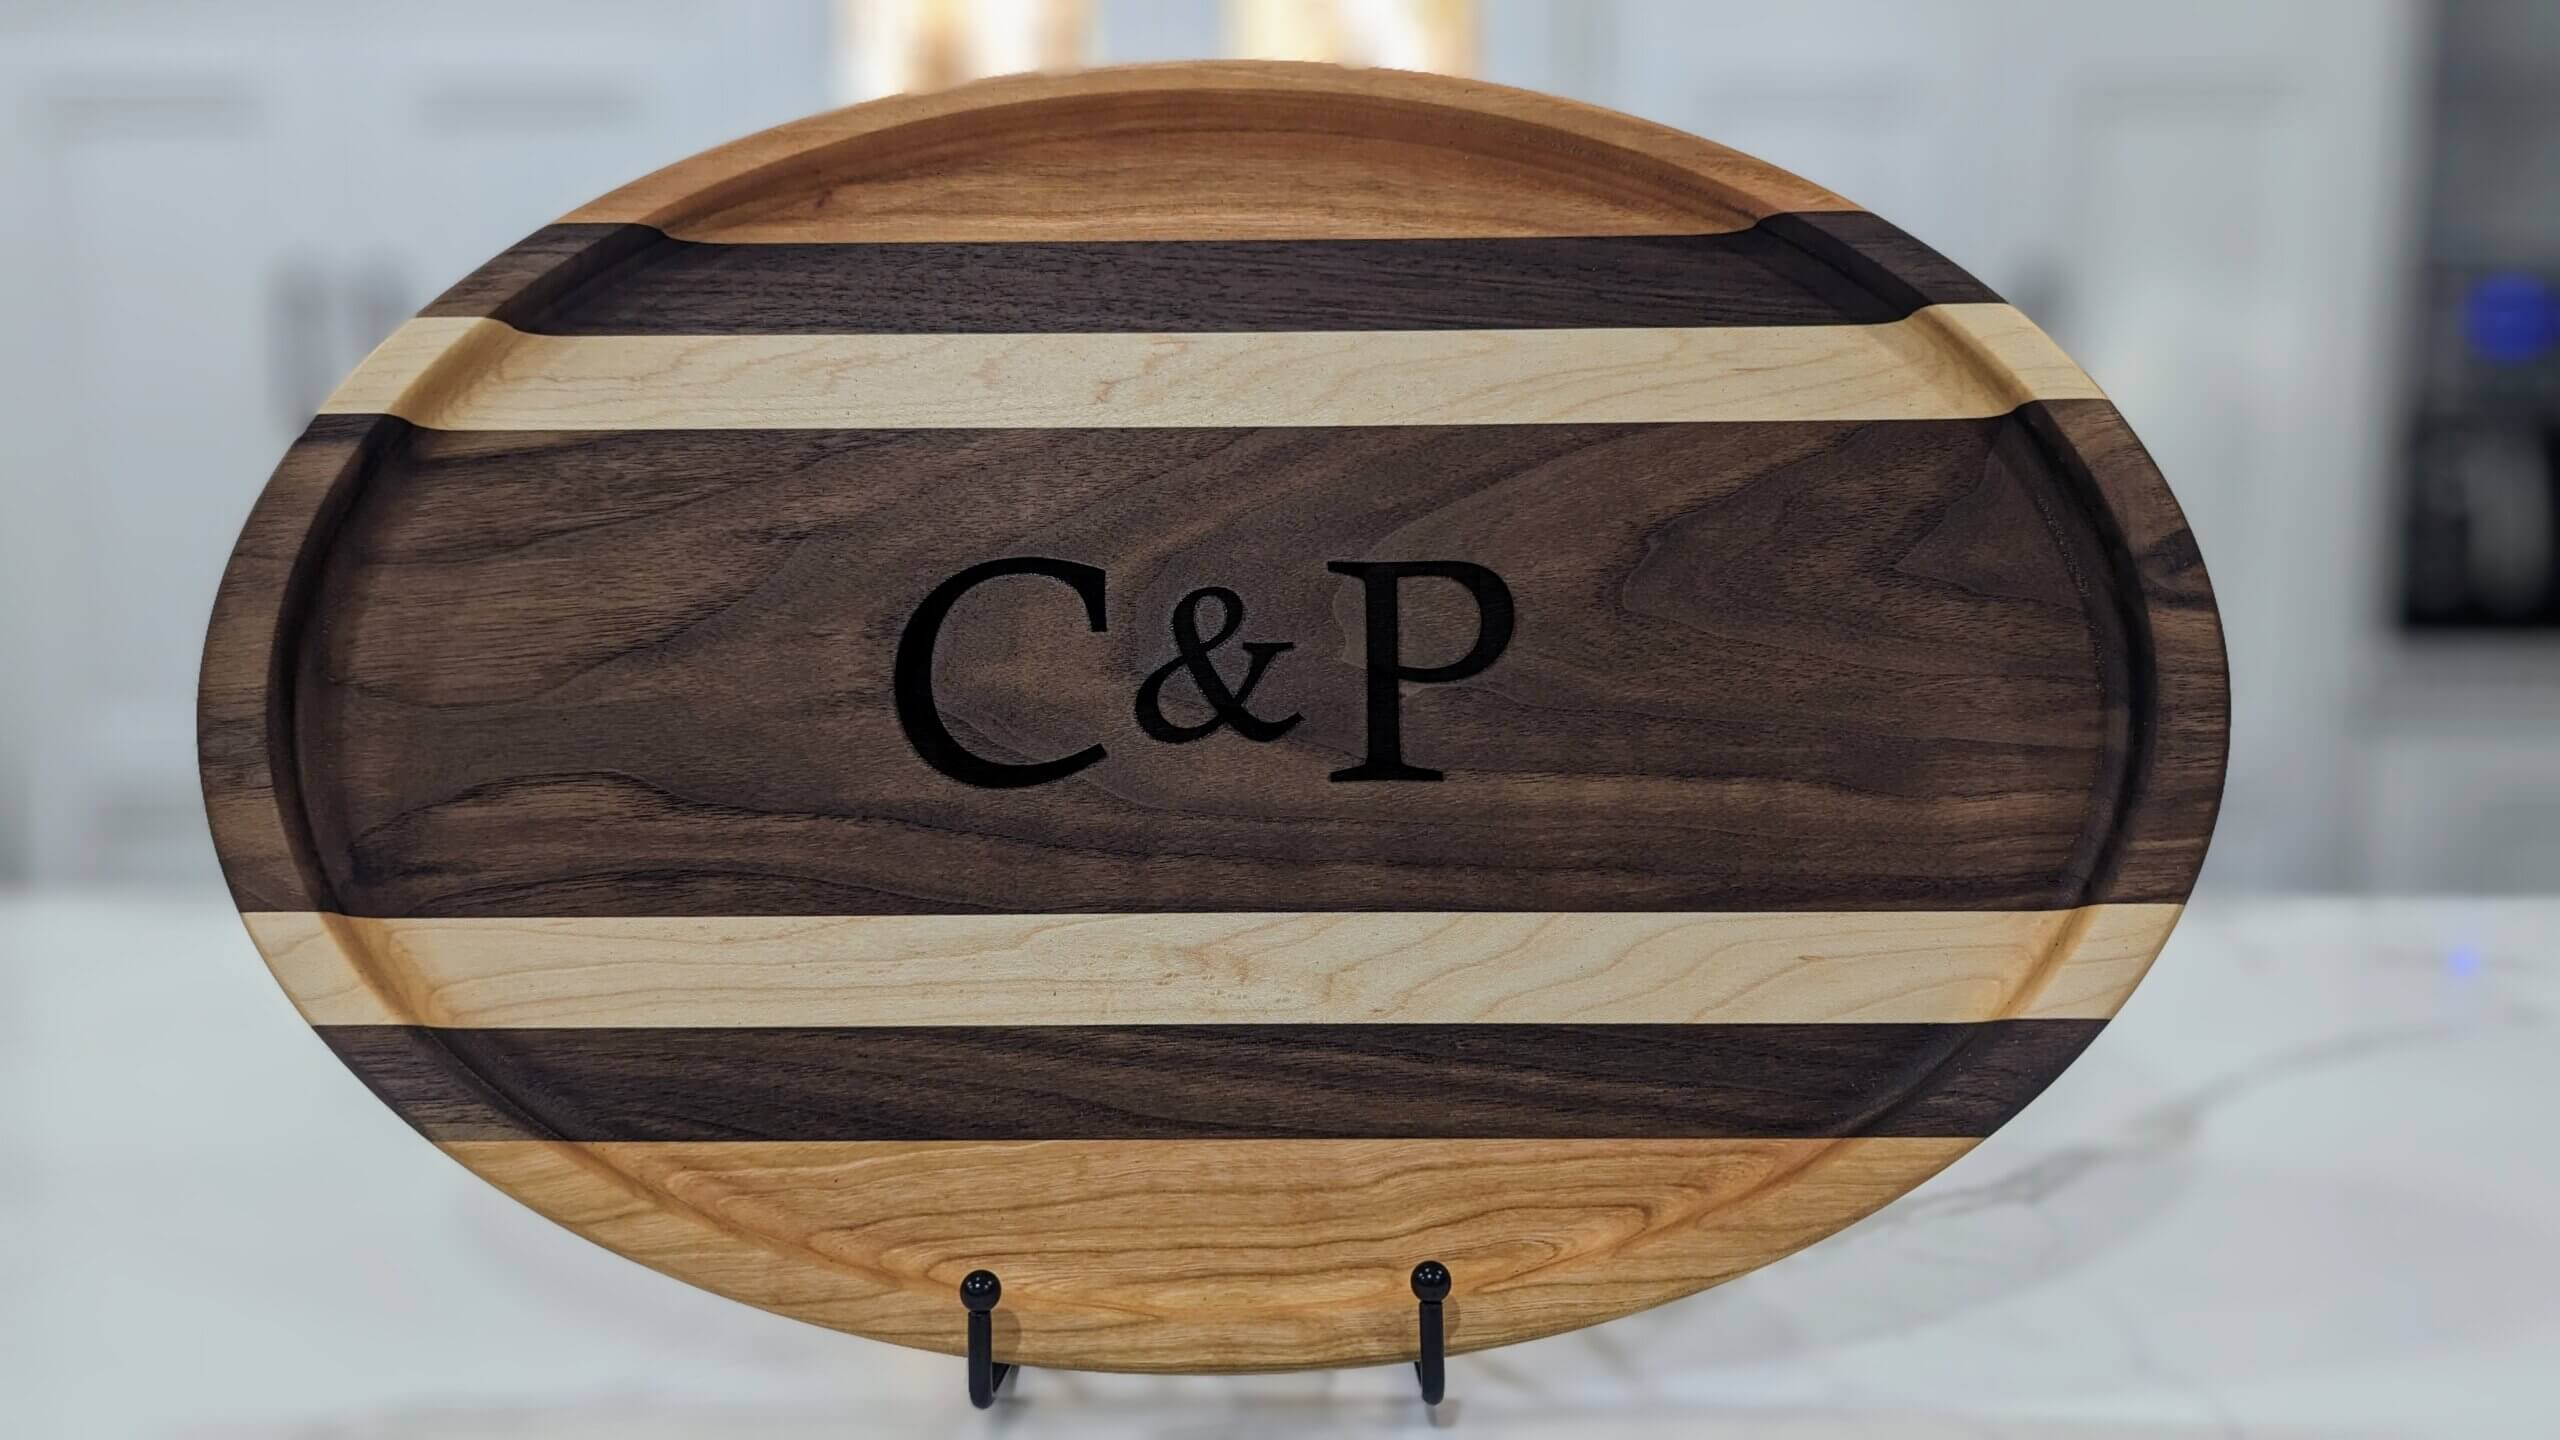 https://craftedathome.com/wp-content/uploads/2023/06/CHAR-OVAL-S1-Engraved-scaled.jpg